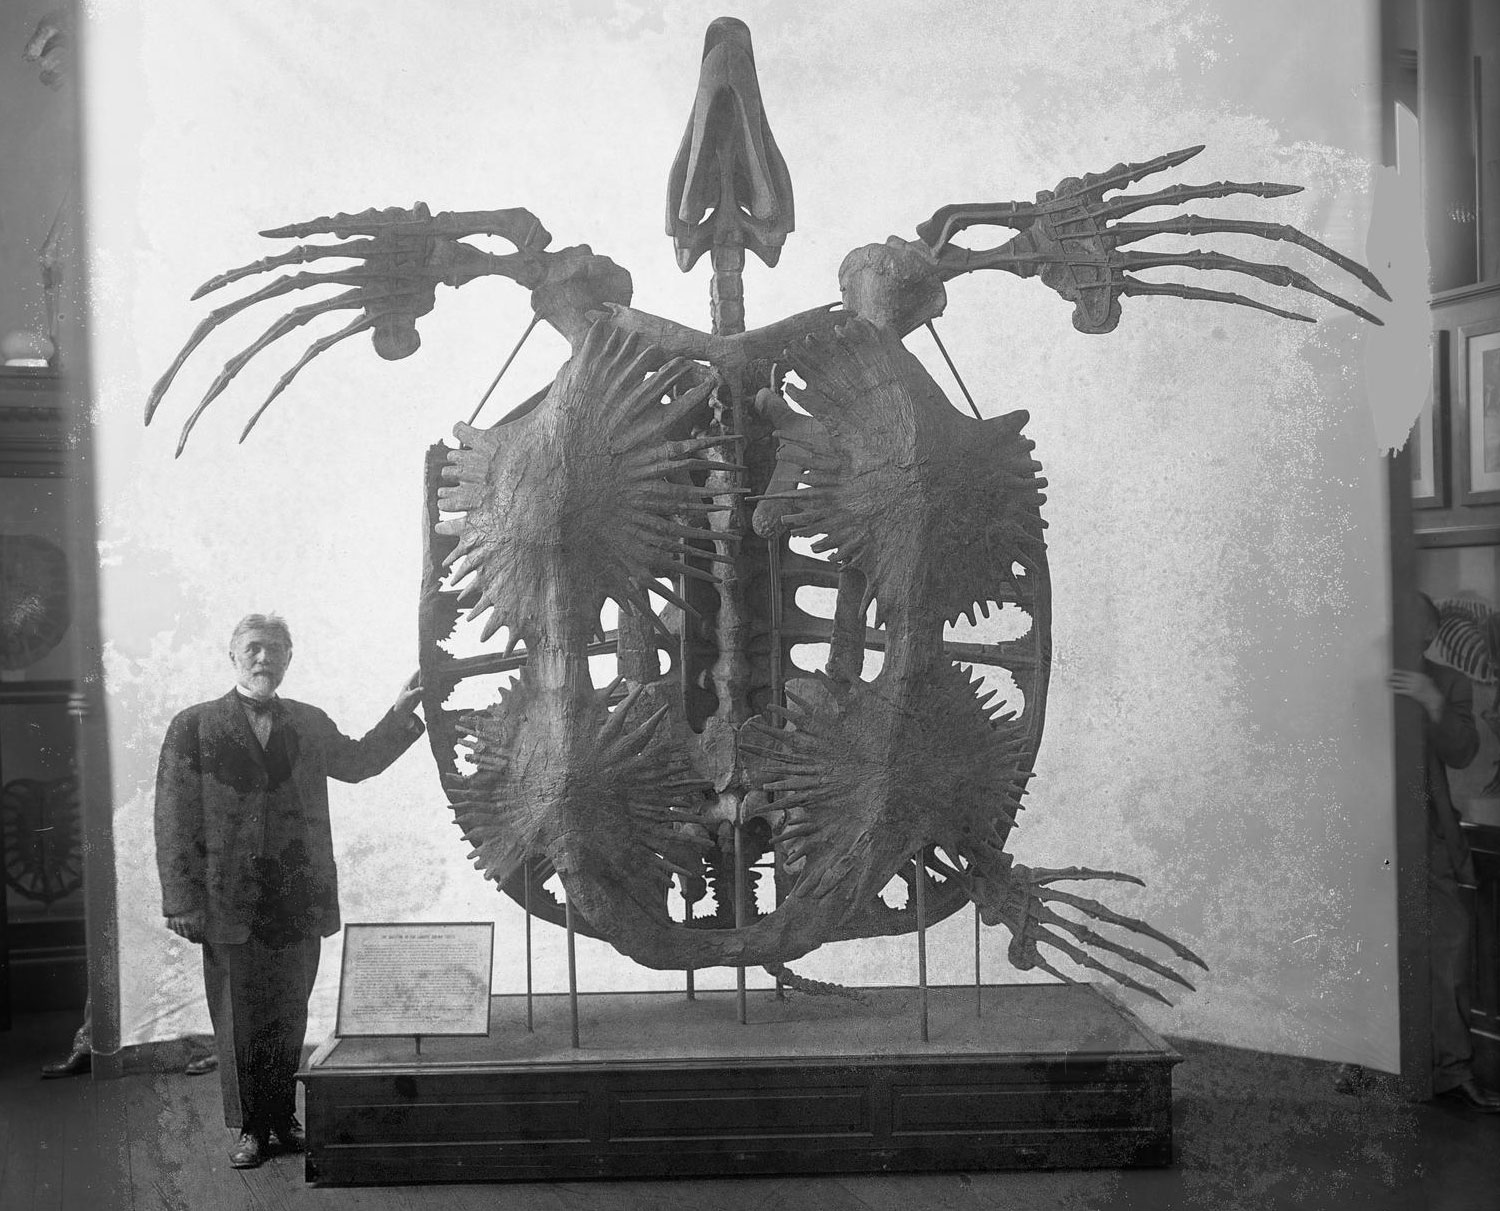 Black and white historical photo of the skeleton of Archelon, a giant sea turtle from the Cretaceous Pierre Shale of South Dakota on display in a museum. The photo shows a turtle skeleton mounted vertically, with the underside of the animal facing the camera. The shell has four large bony shields on the underside, and horizontal bars on the upper side. Three large flippers are present (the fourth, at lower left, is missing). A man in a suit stands next to the skeleton. He is less than half as tall as the skeleton as mounted (the skeleton is attached to a mid-shin-high platform).